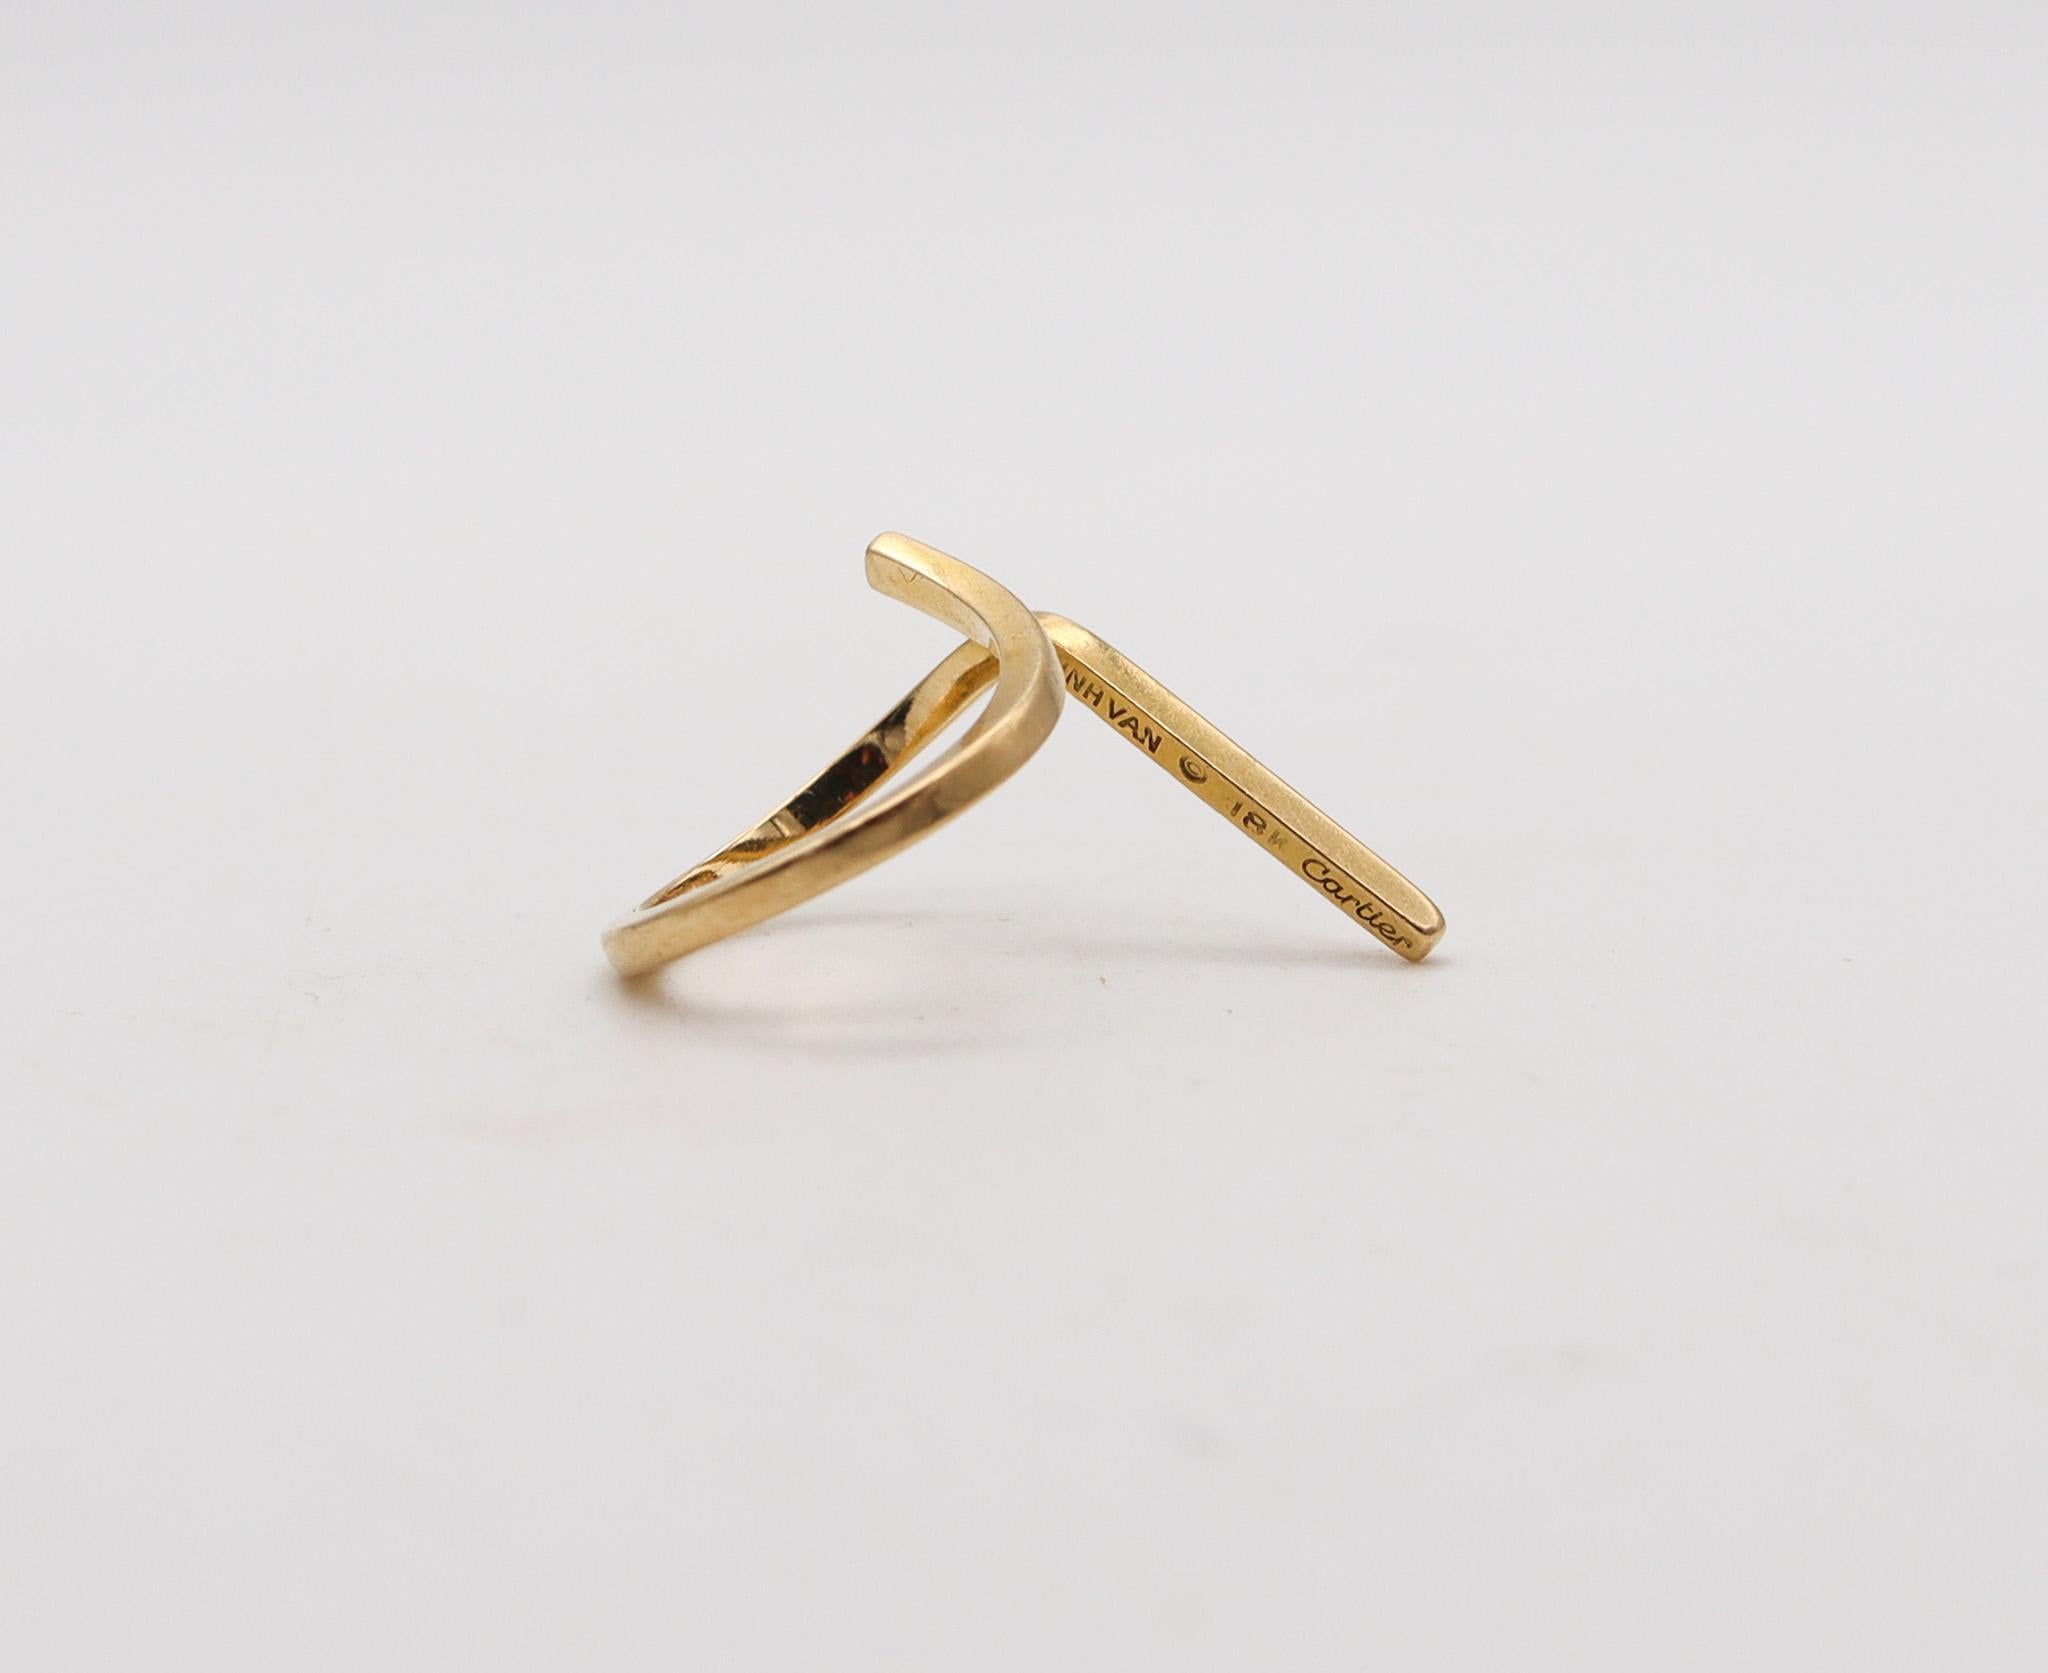 Modernist Cartier Paris 1970 By Dinh Van Geometric Sculptural Ring In 18Kt Yellow Gold For Sale